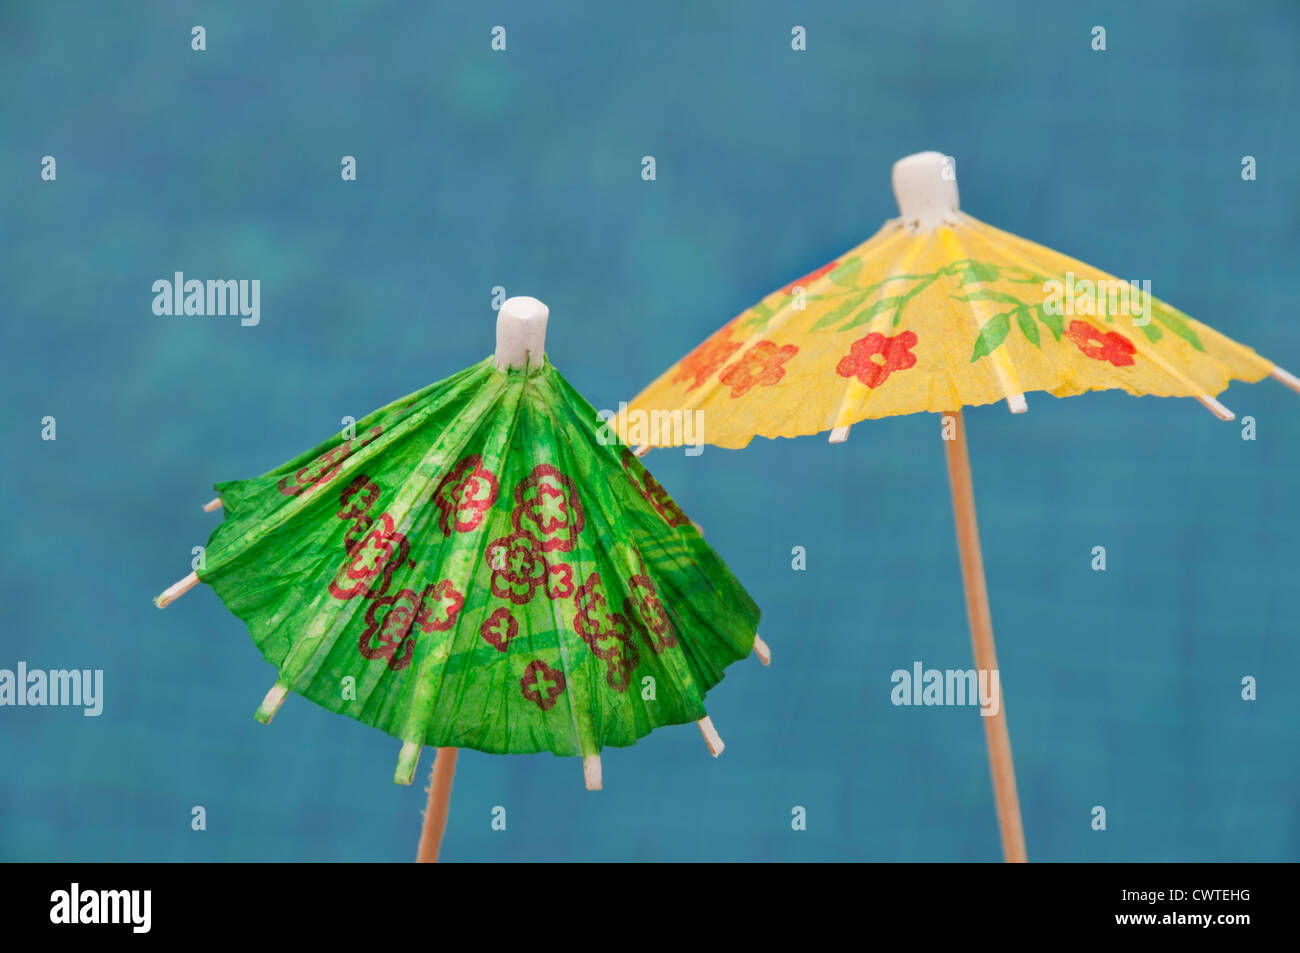 Two colorful paper drink umbrellas are open against a blue background. Stock Photo